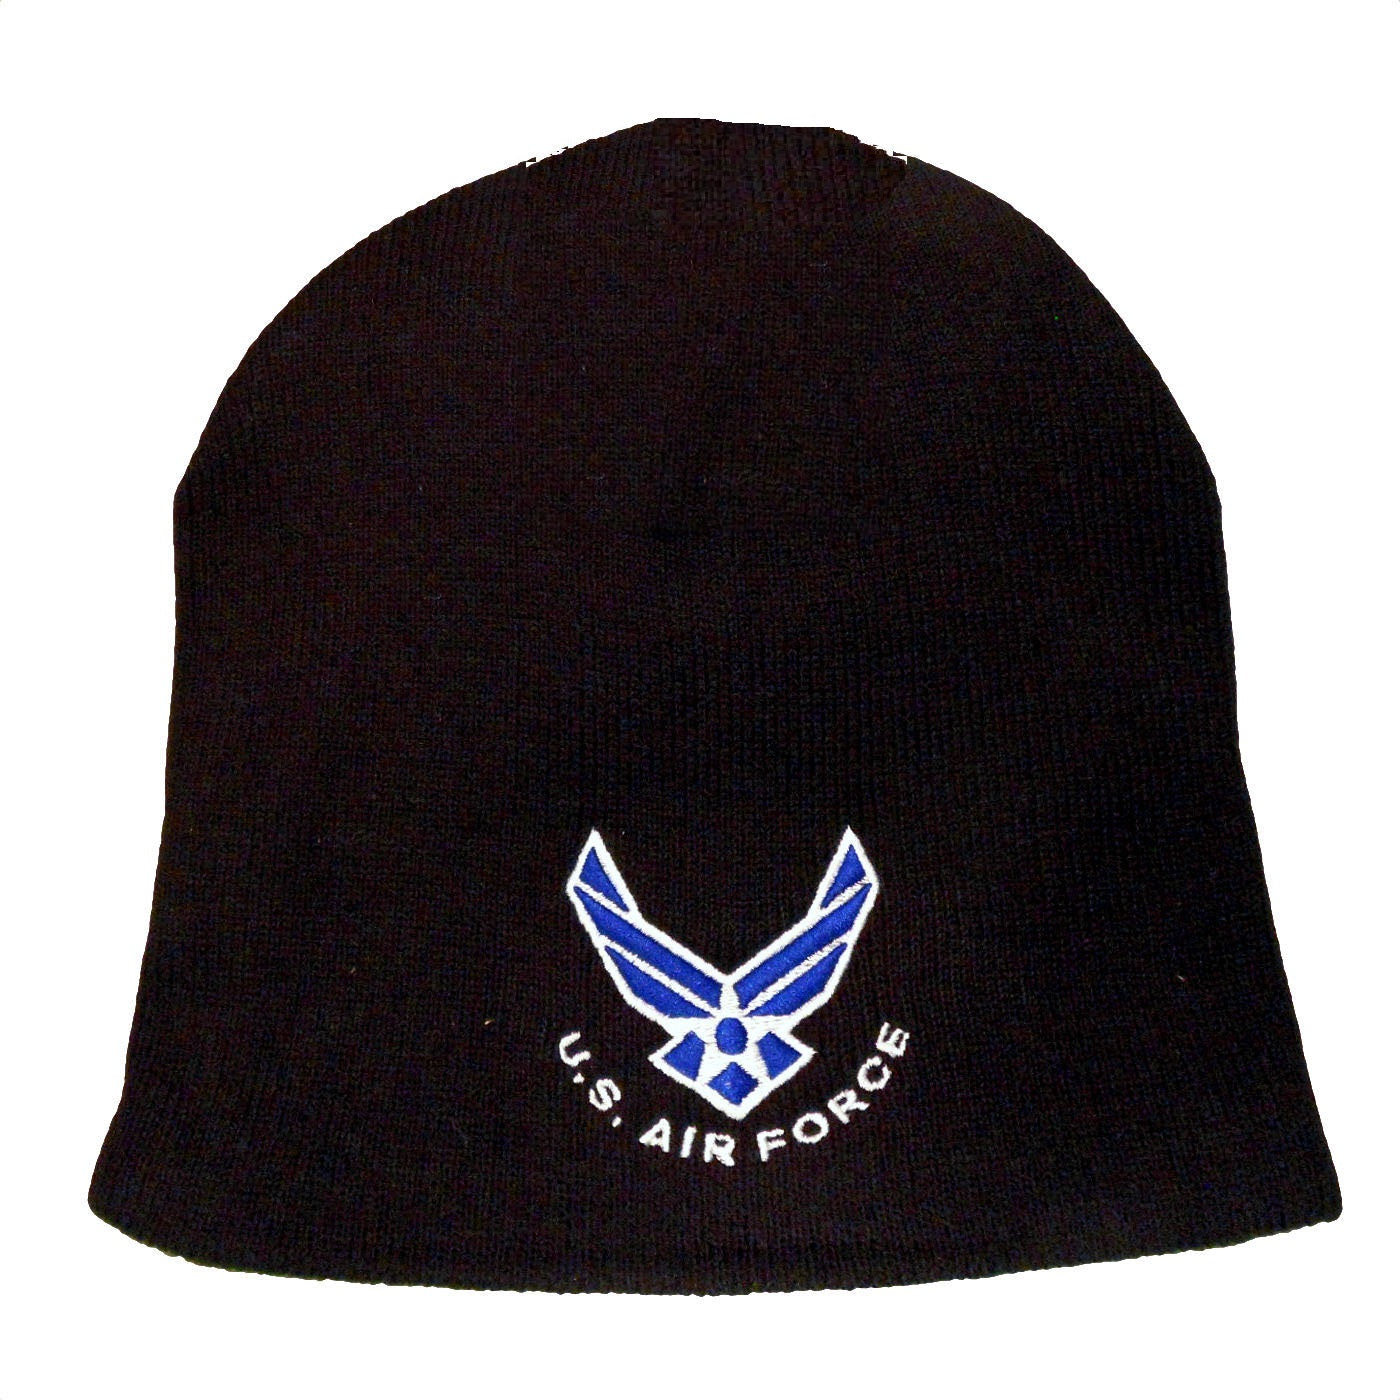 8" US AIR FORCE LICENSED BLACK EMBROIDERED WINTER BEANIE SKULL CAP hat